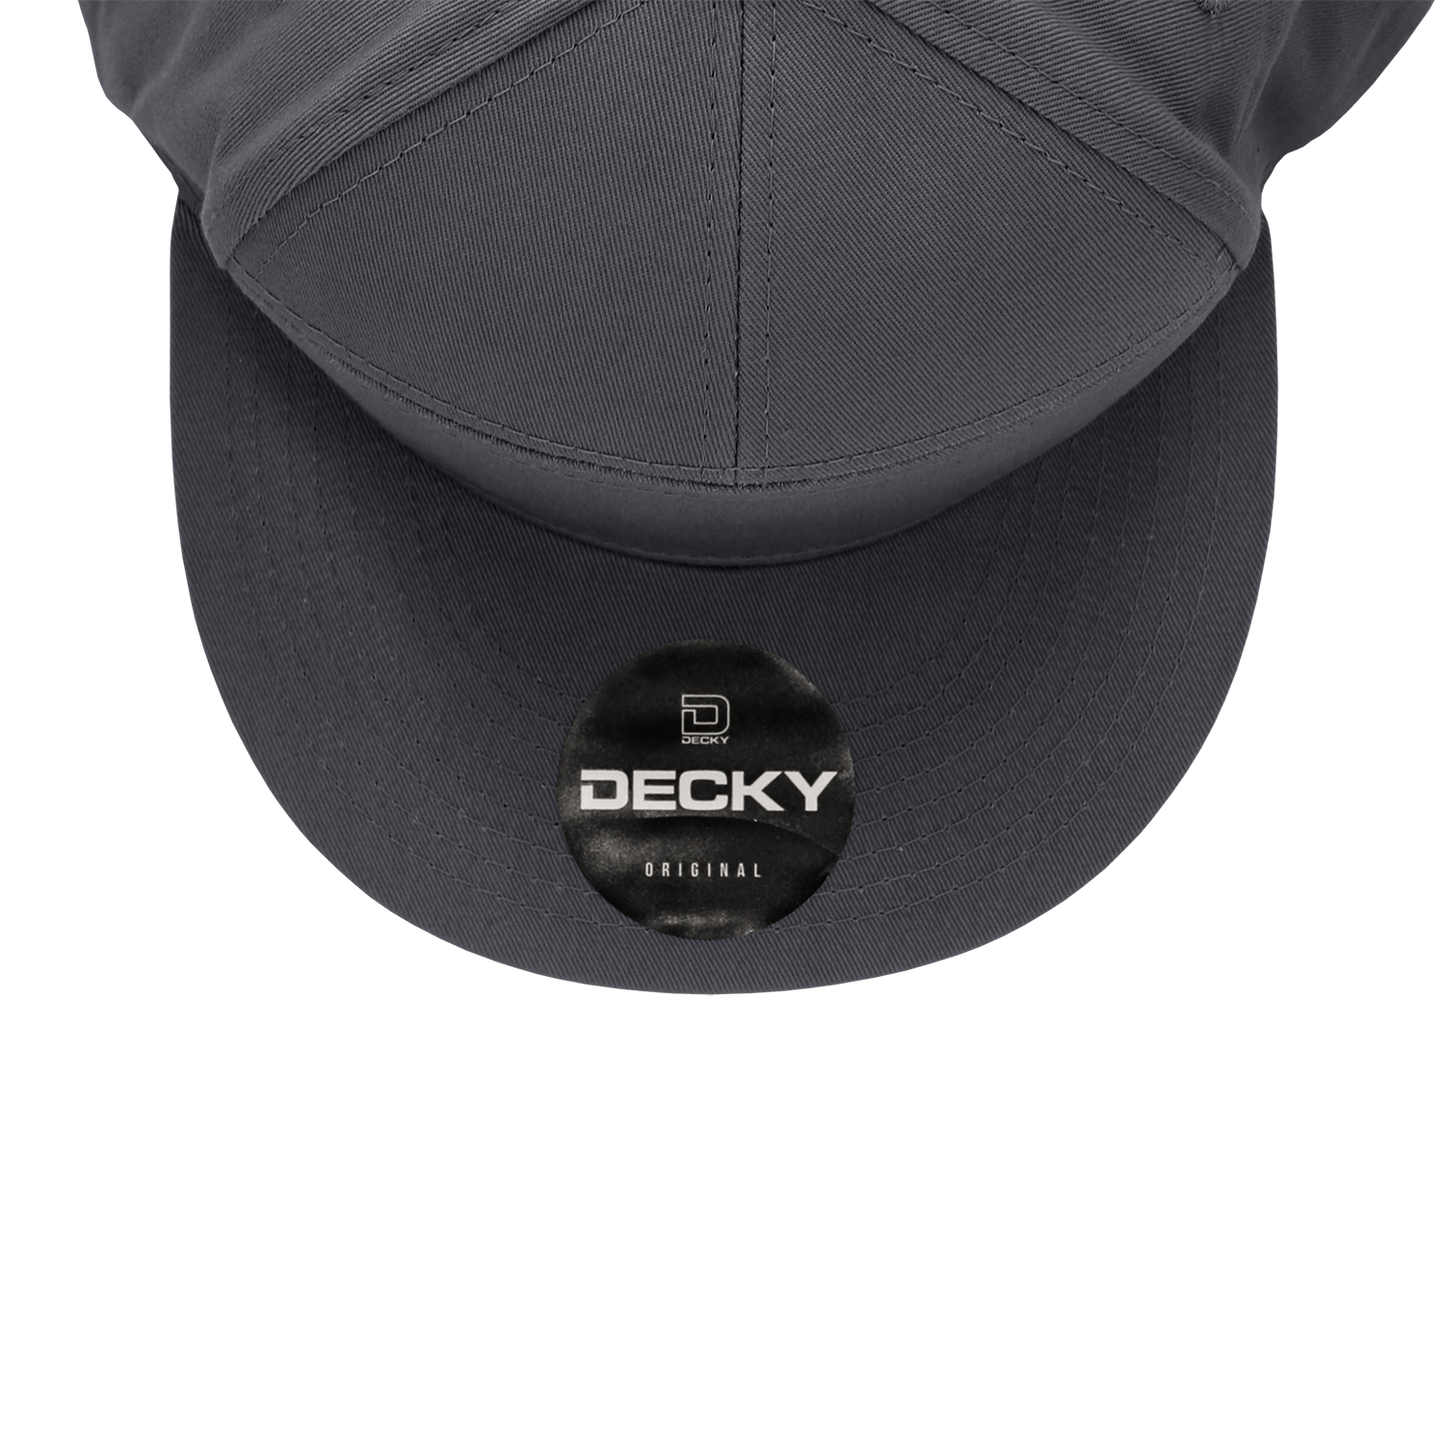 Custom Embroidered Decky 1098 - 7 Panel Flat Bill Hat, Snapback, 7 Panel High Profile Structured Cap